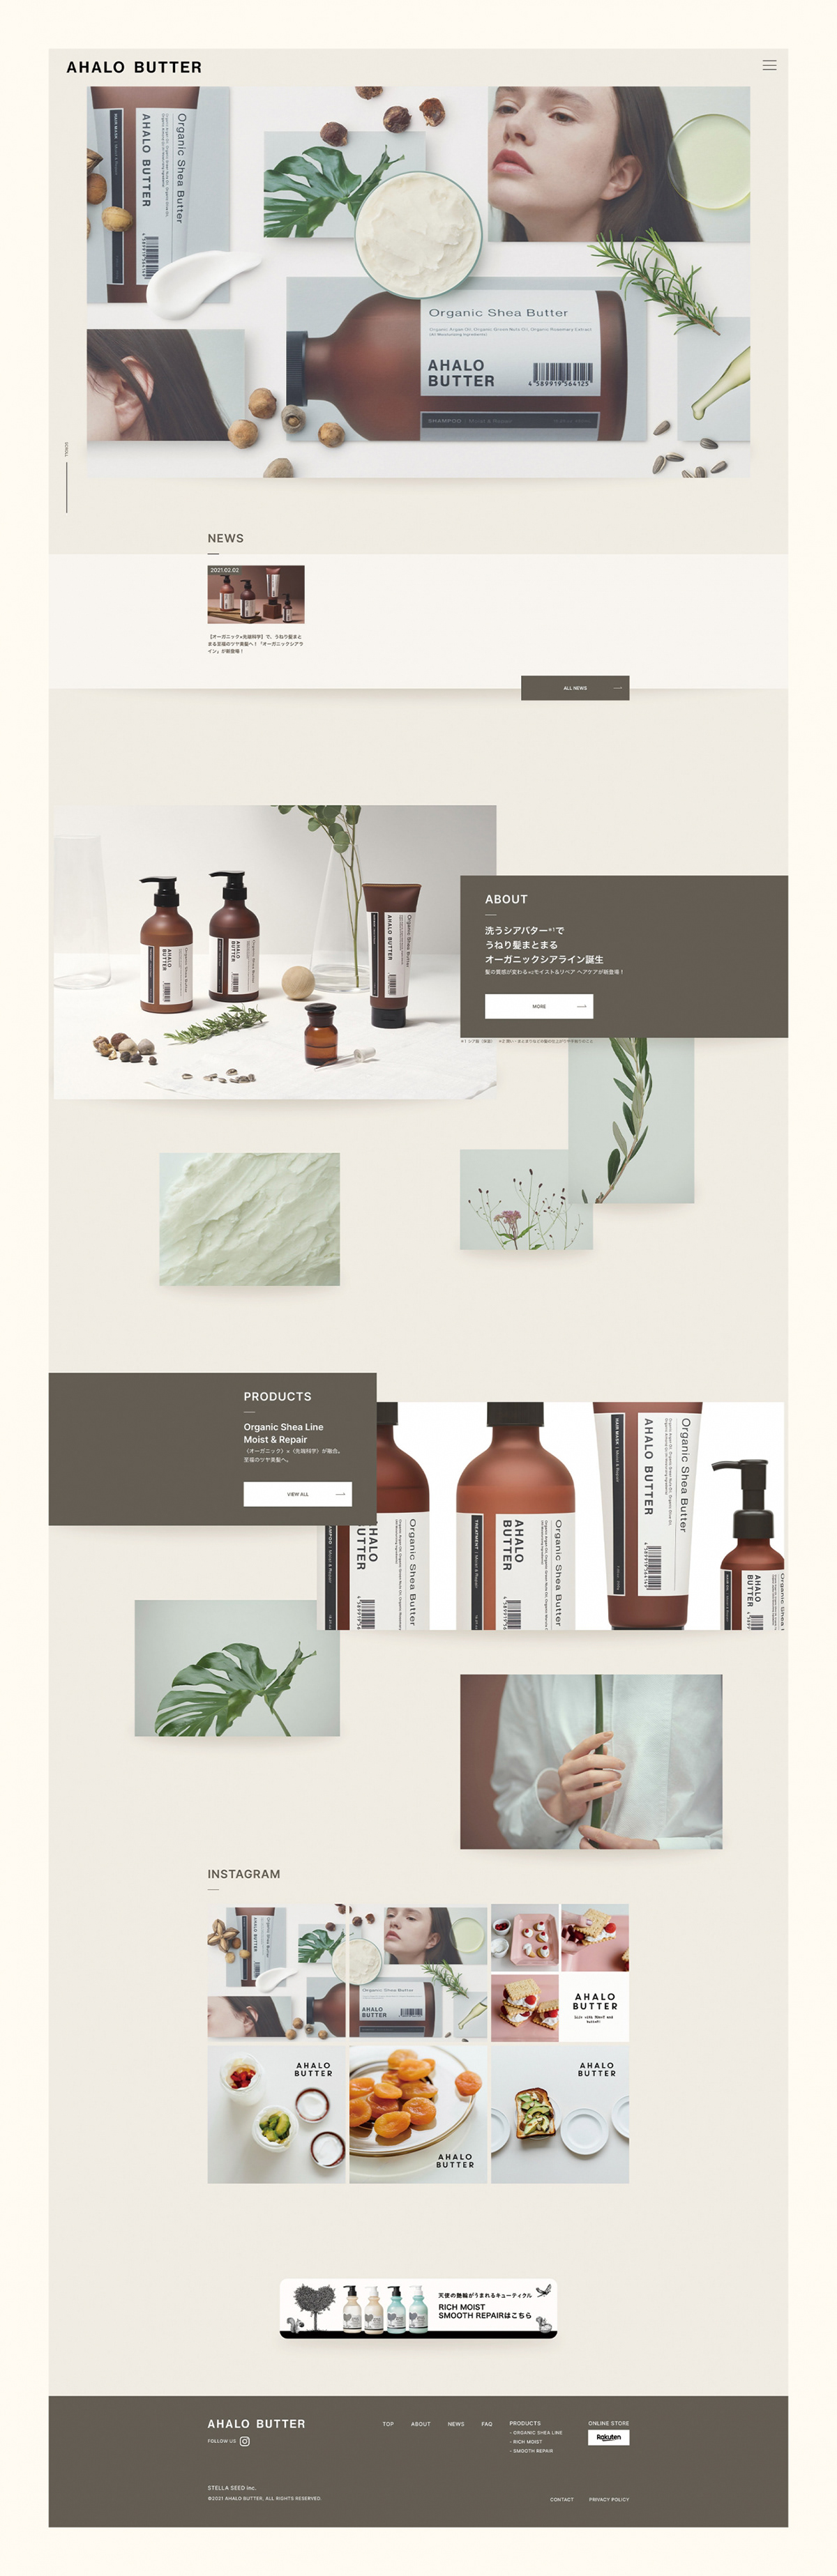 brand branding  graphicdesign haircare interactivedesign mainvisual packagedesign Photodirection